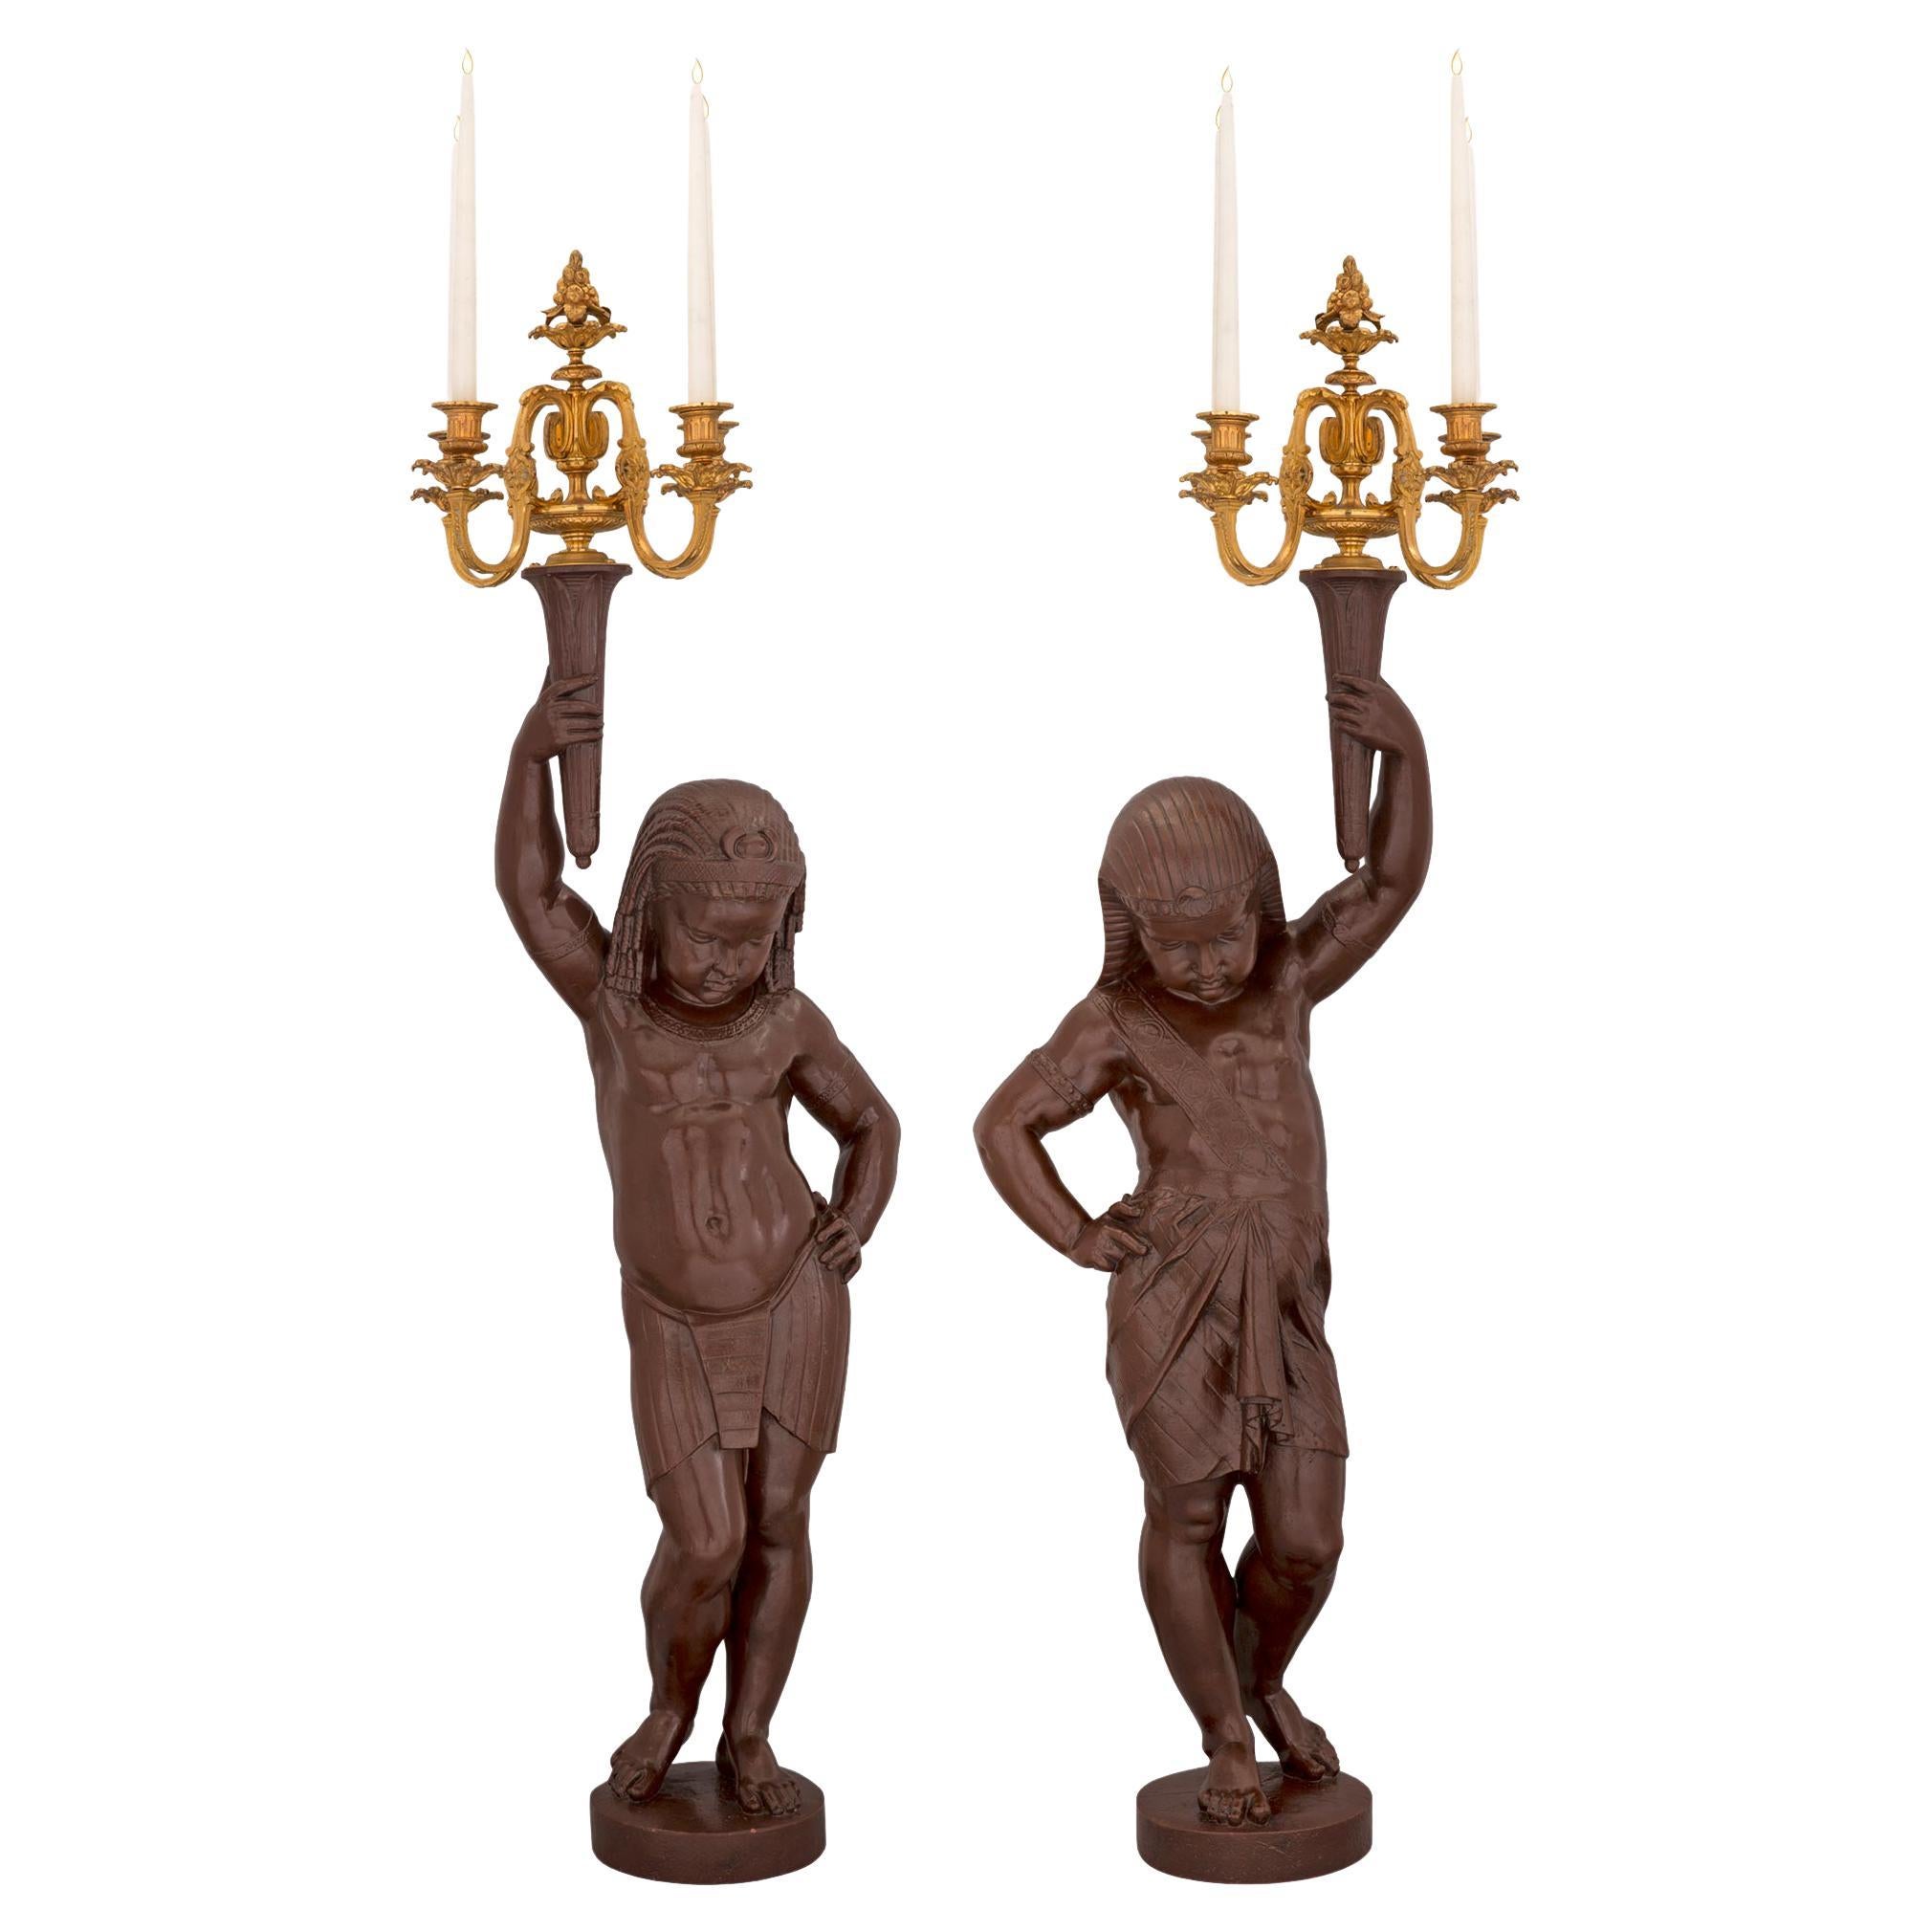 Pair of French Mid-19th Century Patinated Bronze and Ormolu Candelabra Statues